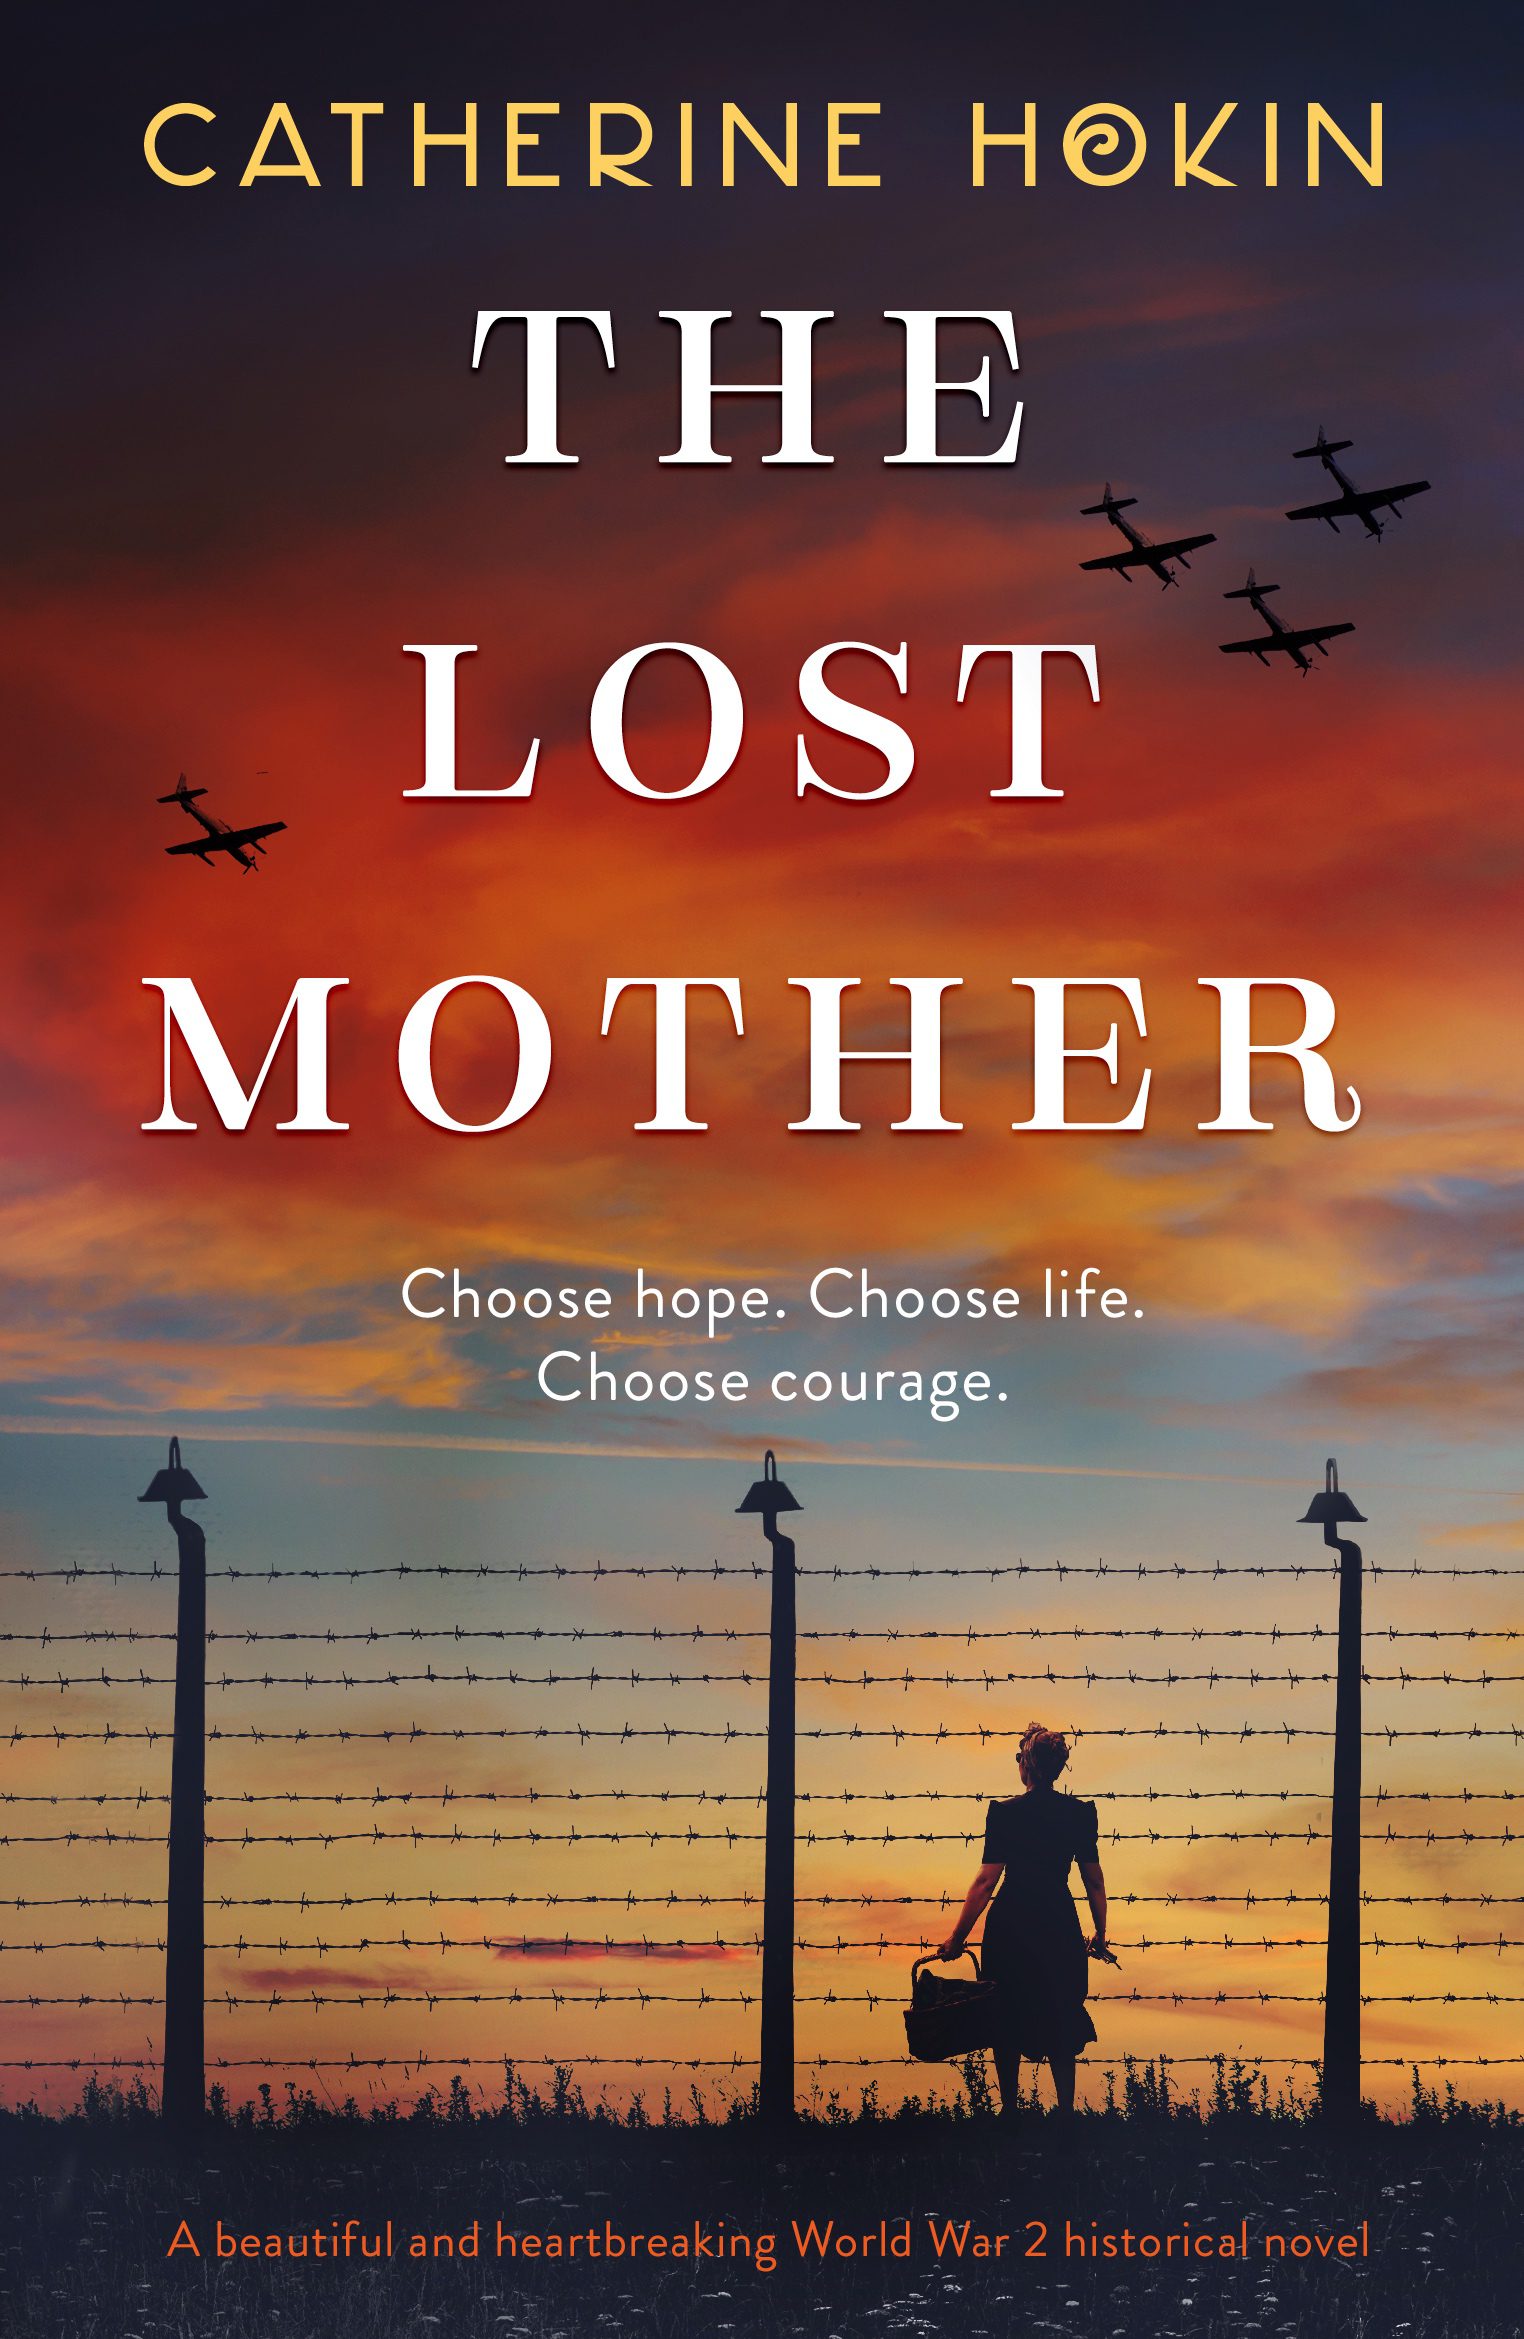 The Lost Mother book cover